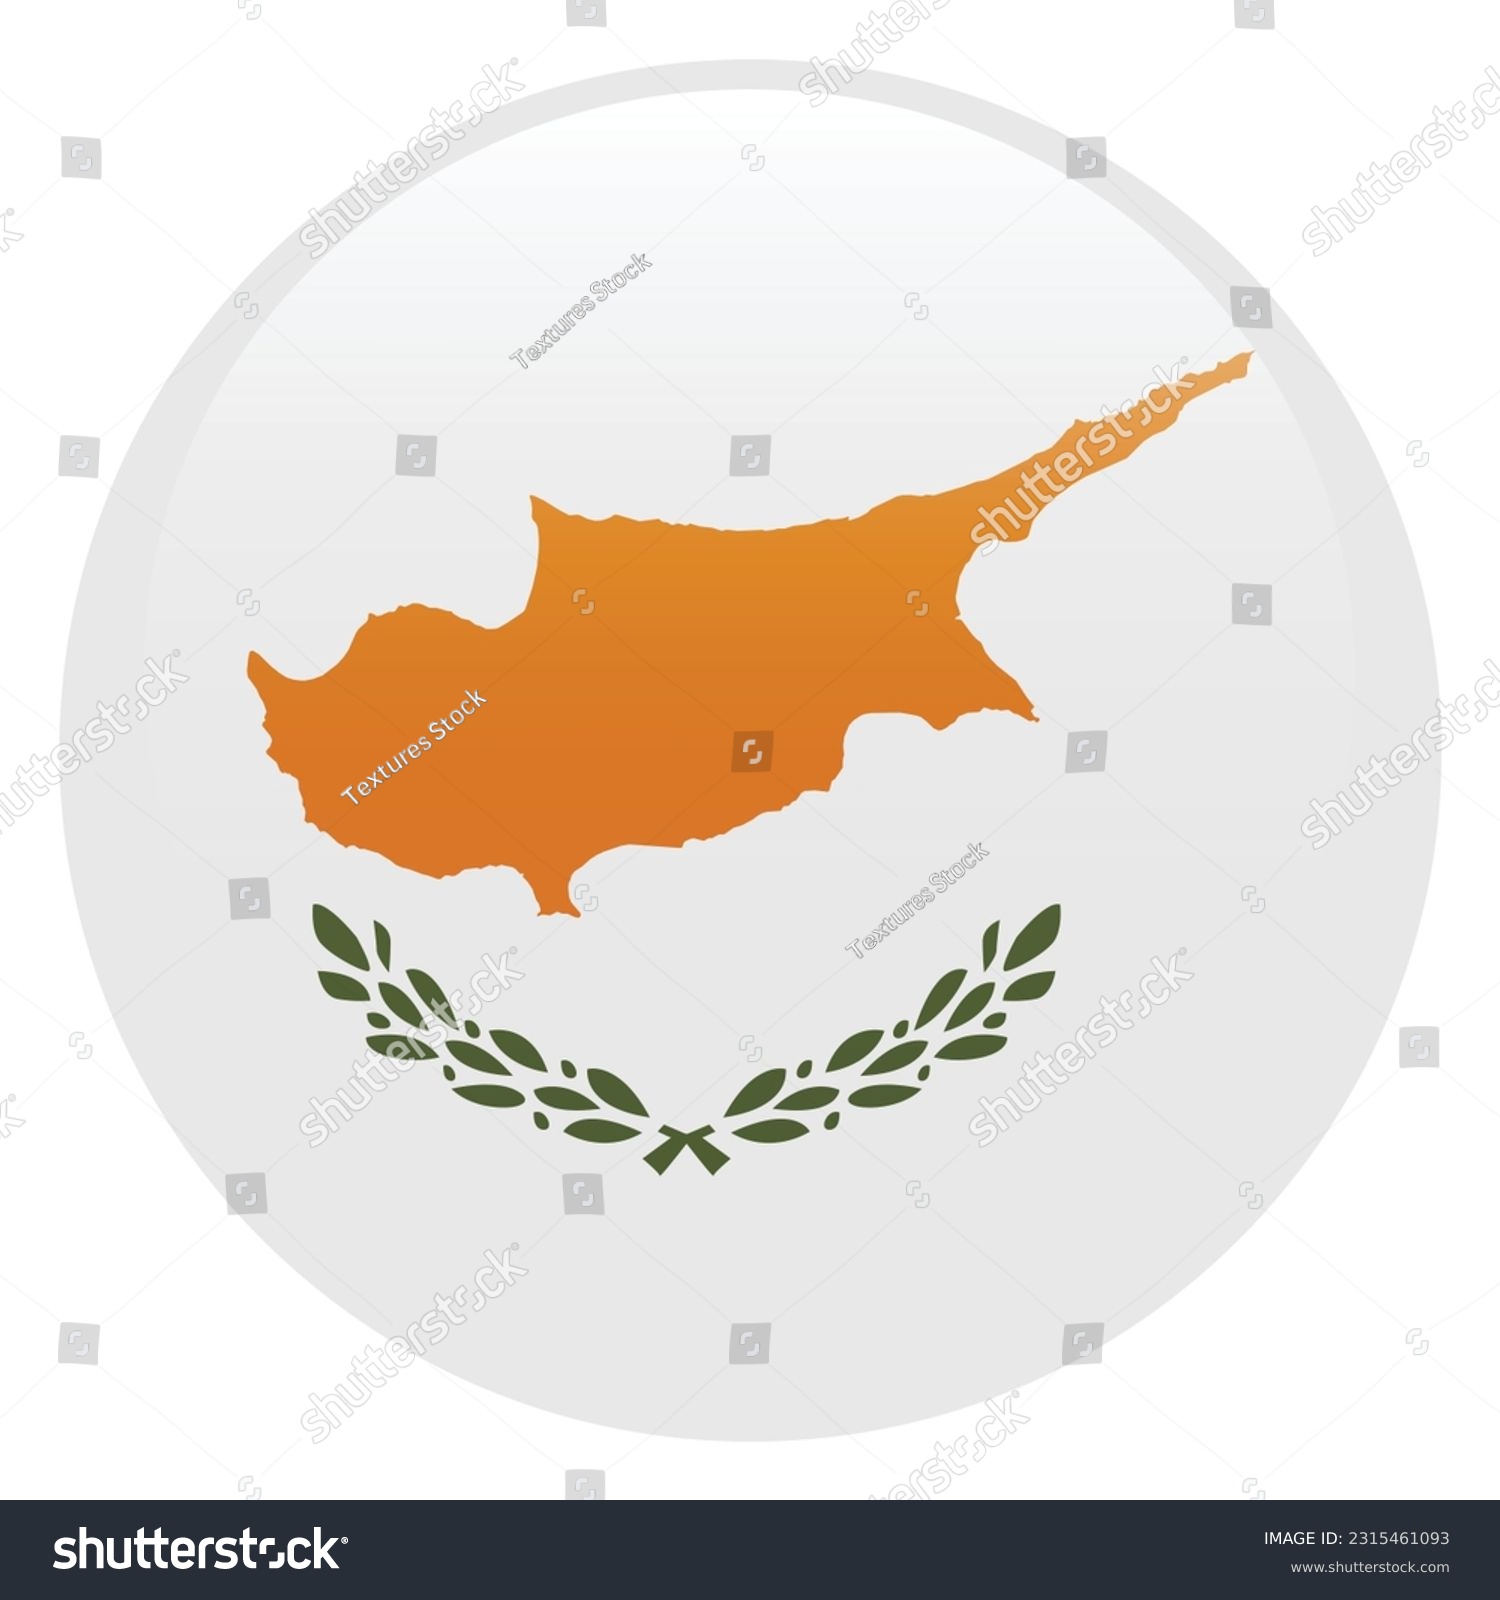 SVG of The flag of Cyprus. Flag icon. Standard color. A round flag. Computer illustration. Digital illustration. Vector illustration. svg